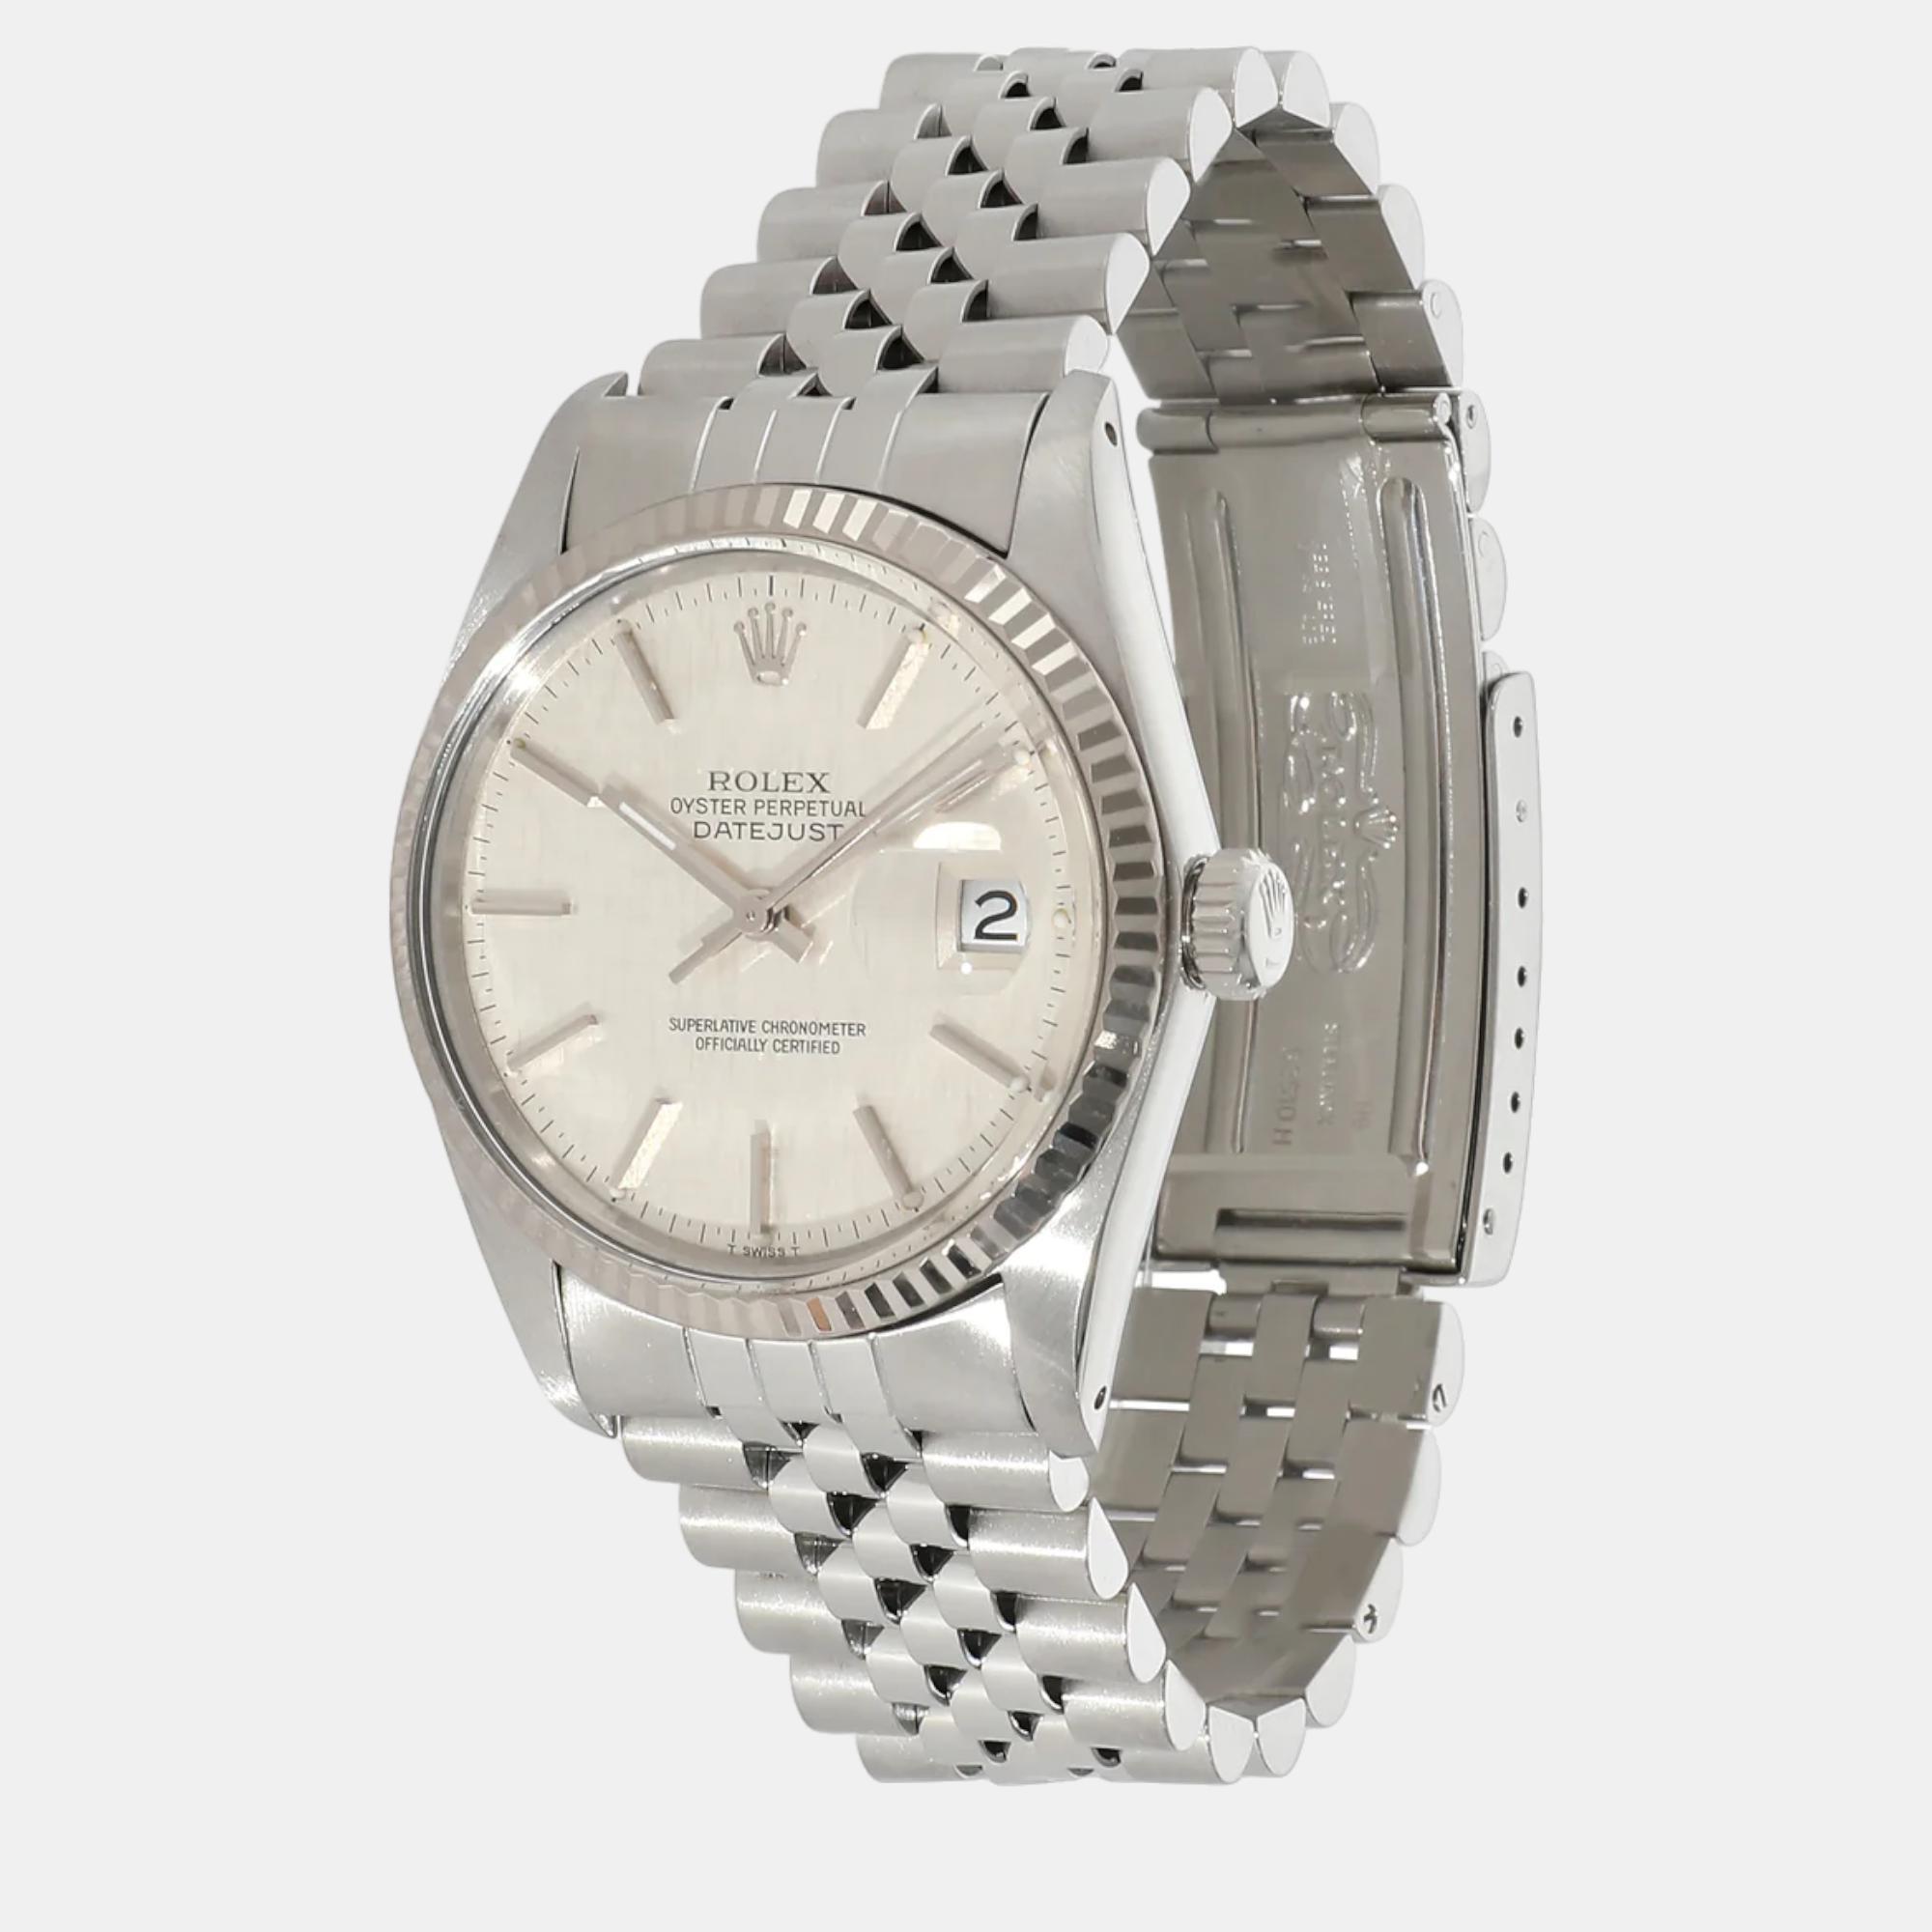 

Rolex Silver 18k White Gold And Stainless Steel Datejust 16014 Automatic Men's Wristwatch 36 mm